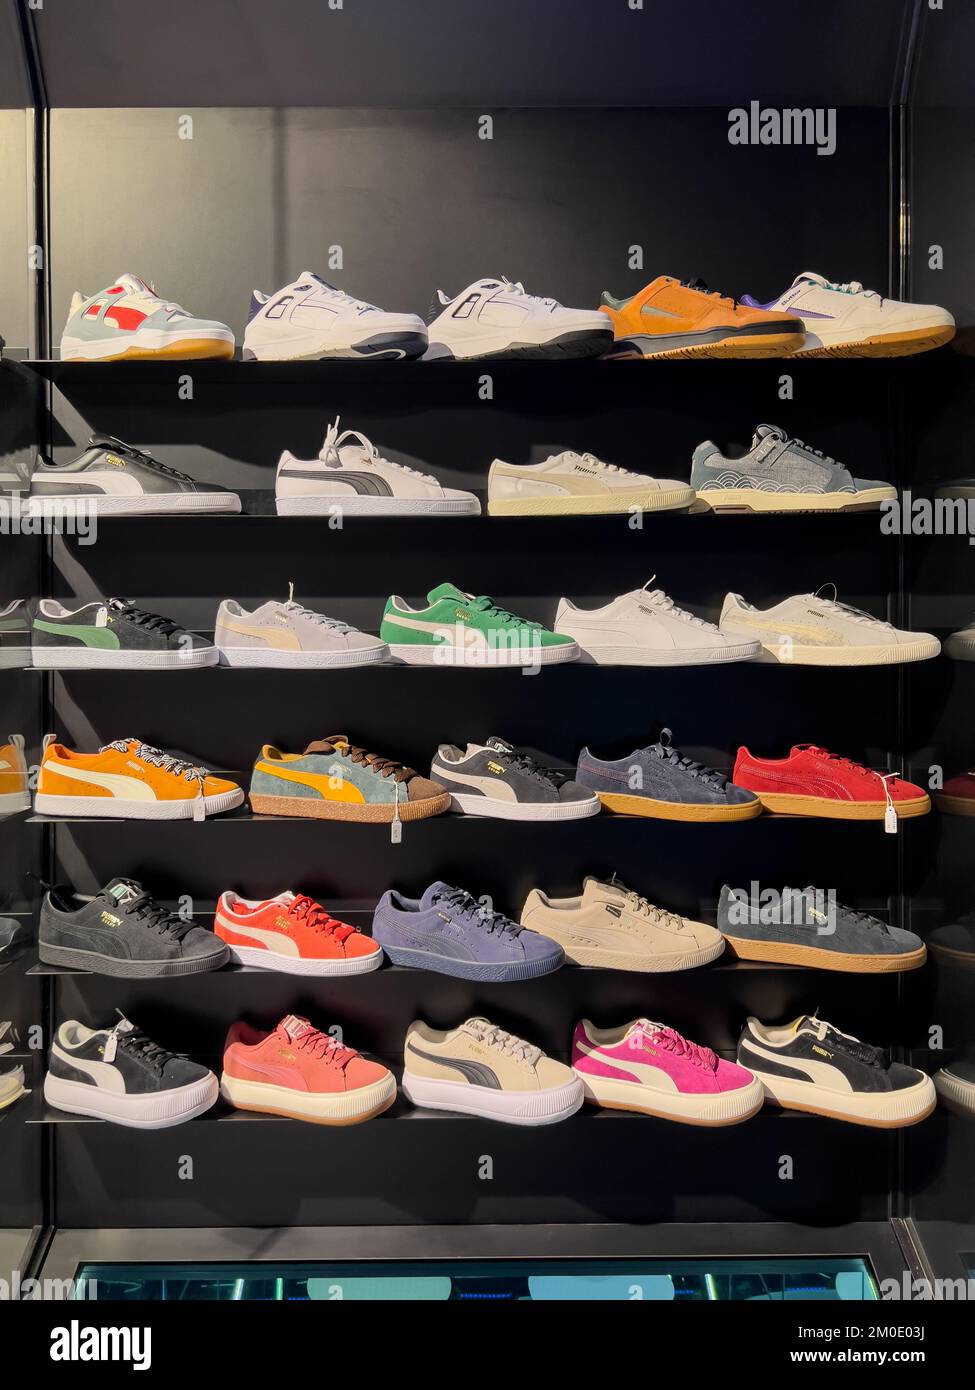 Neat display of Puma shoes model on shelves for the customer to glance or admire the stylish design. Stock Photo